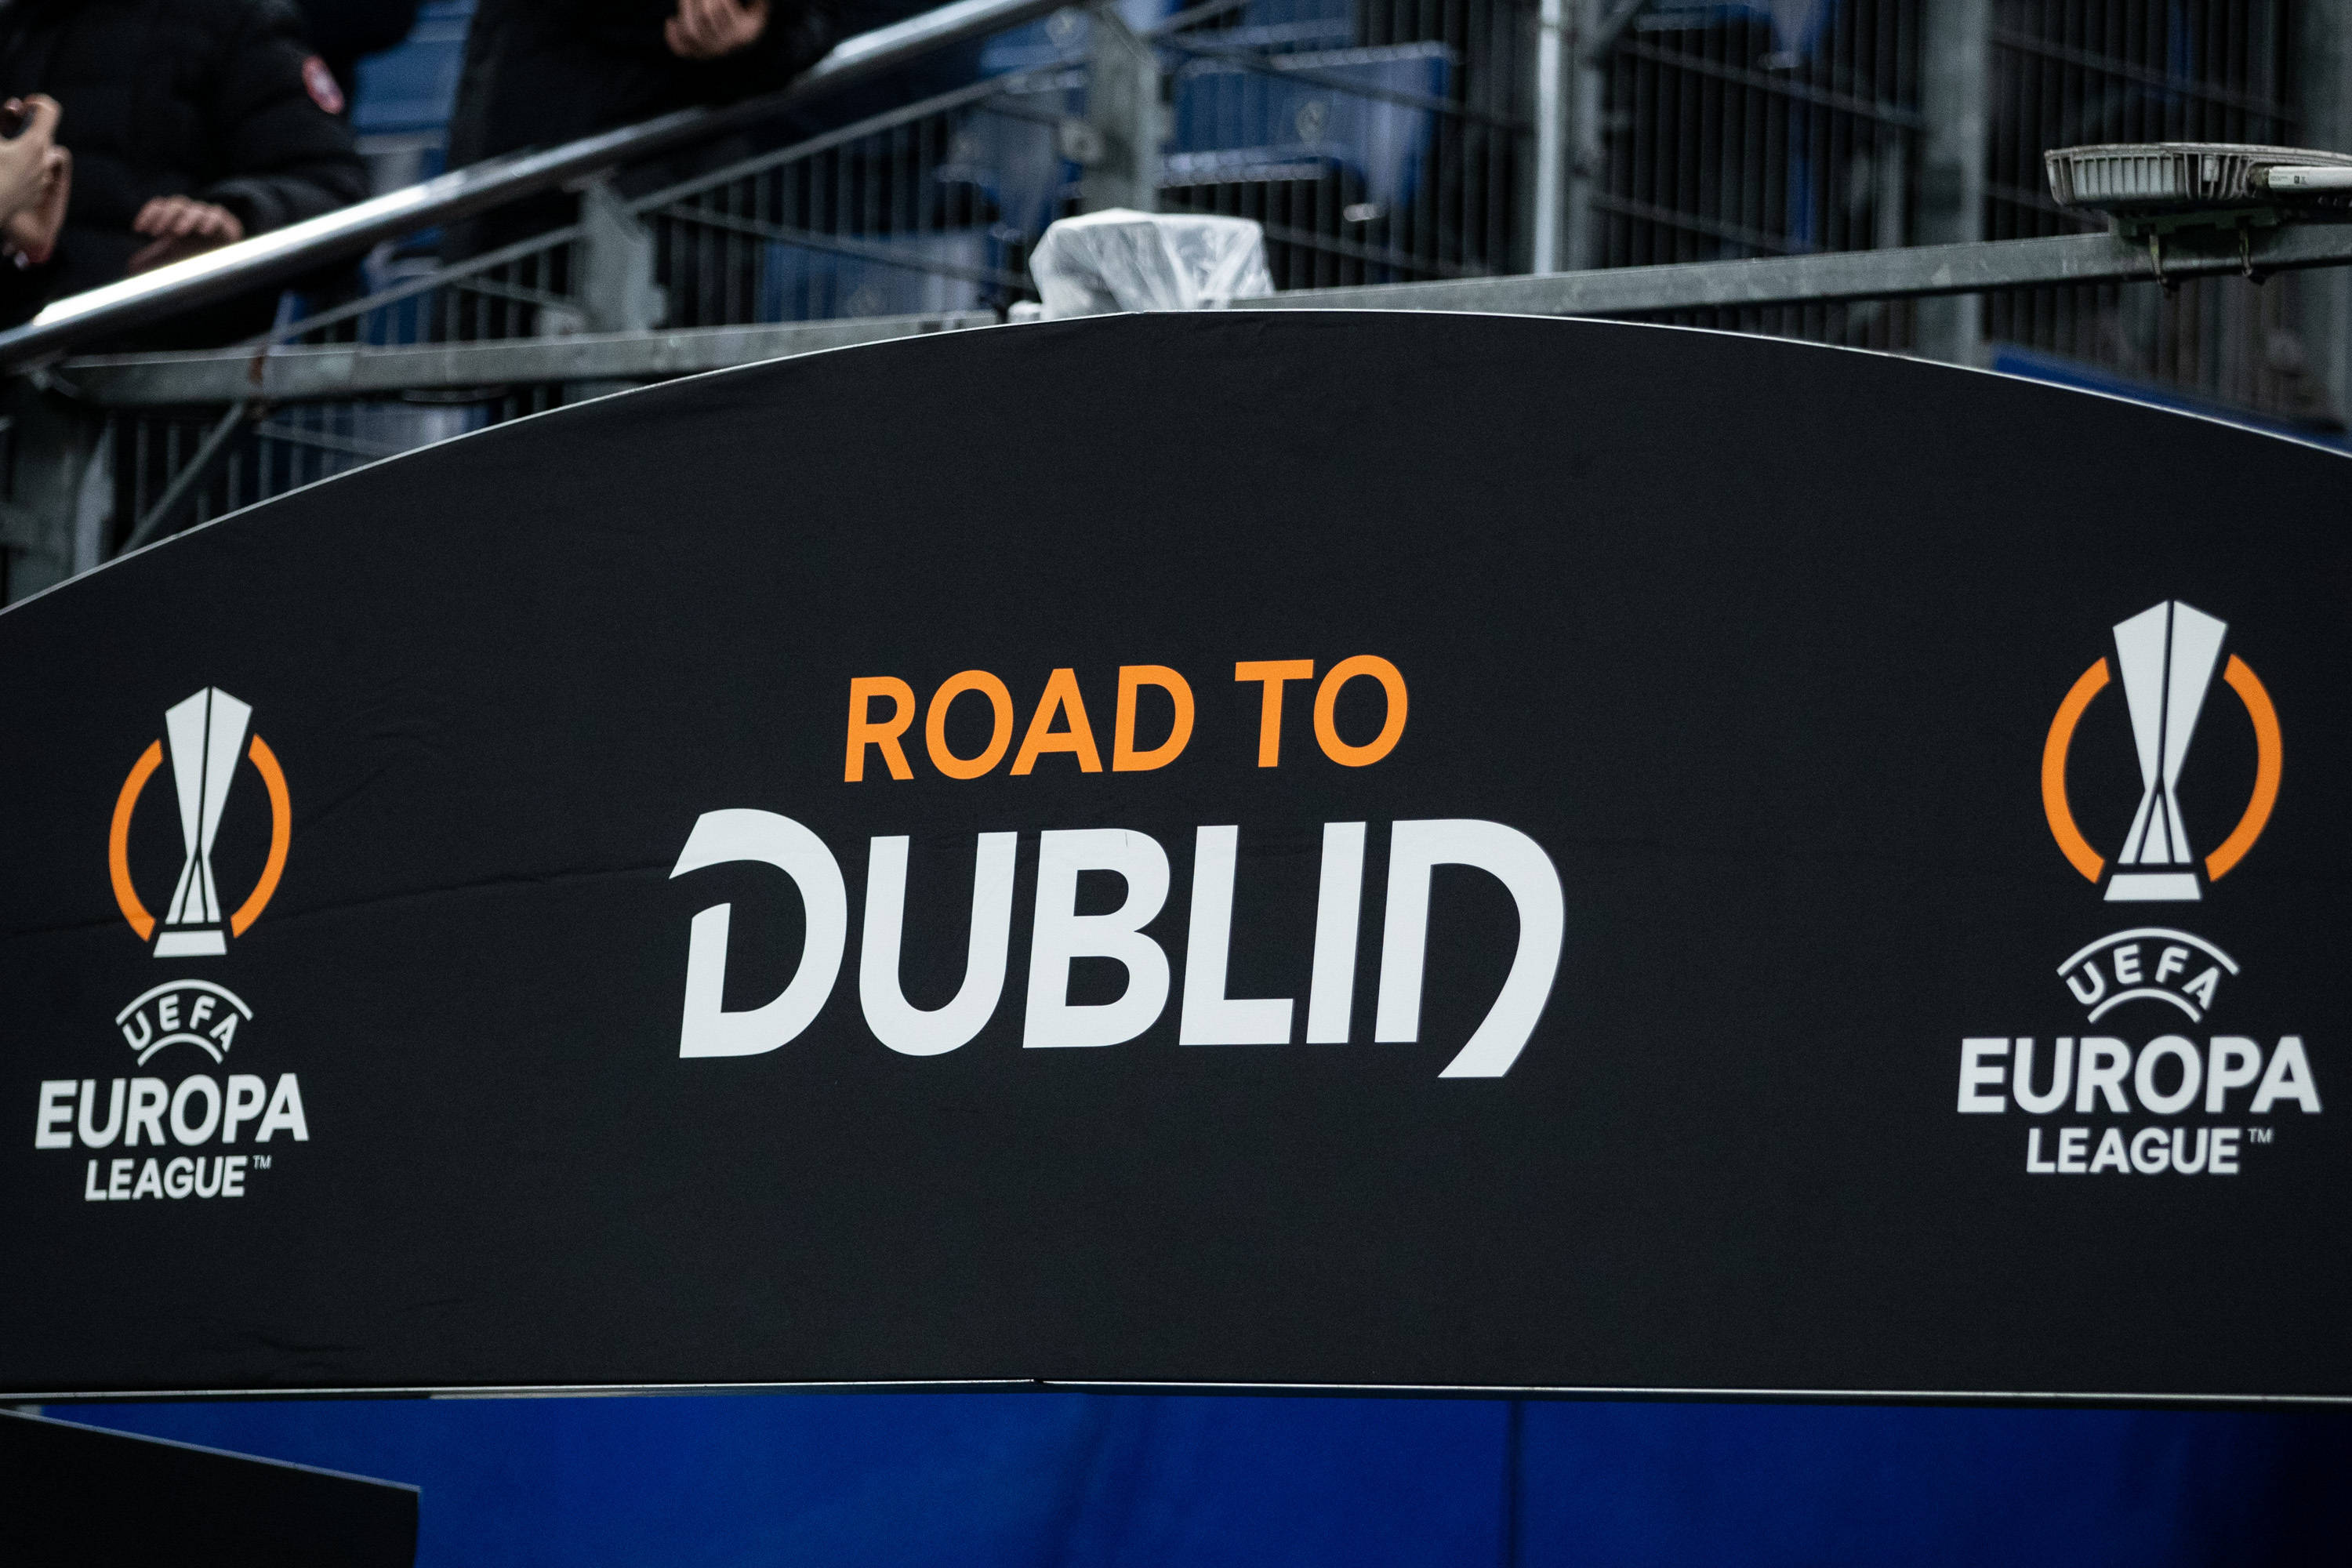 A UEFA Europa League sign reading "ROAD TO DUBLIN" pictured at a game between Shakhtar Donetsk and Olympique Marseille in February 2024